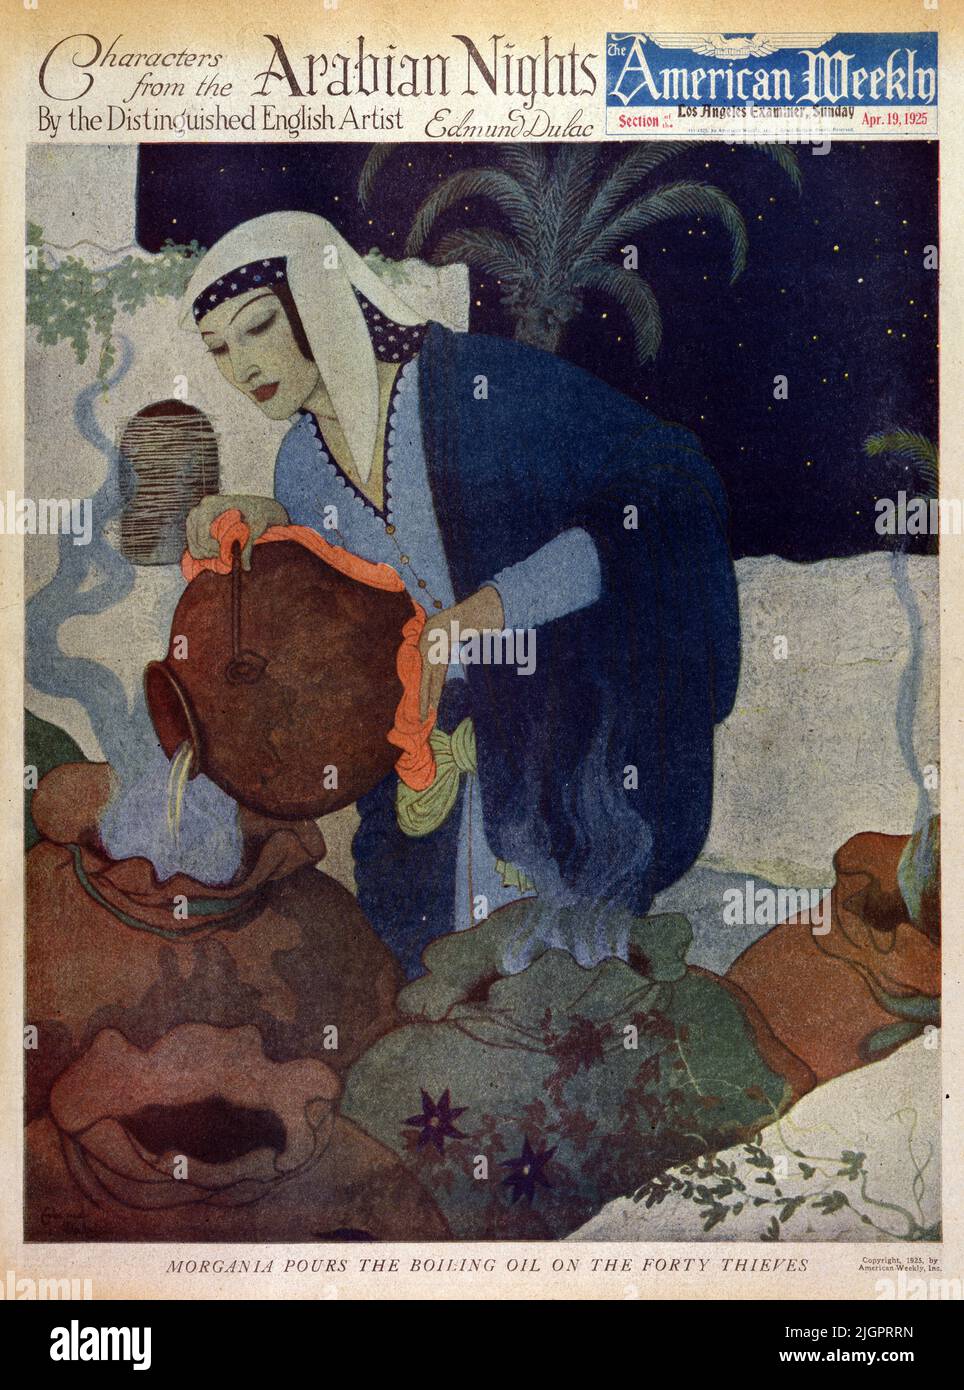 'Morgania Pours the Boiling Oil the Forty Thieves' published on April 19,1925 in the American Weekly Sunday magazine as part of the 'Characters from the Arabian Nights' series. Stock Photo